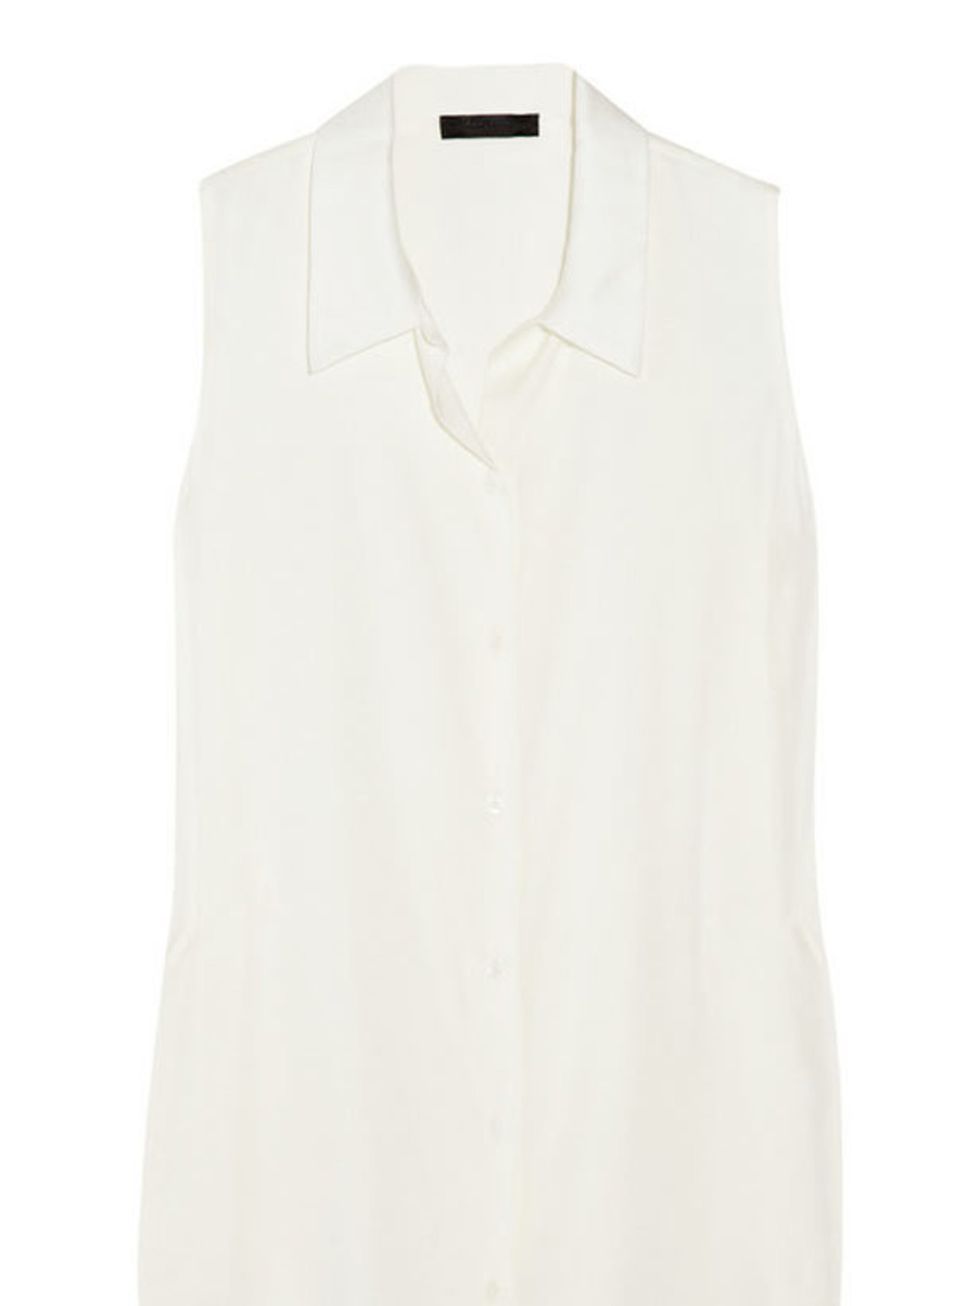 <p>The Row sleeveless blouse, £310, at <a href="http://www.net-a-porter.com/product/161648">Net-a-Porter</a></p>